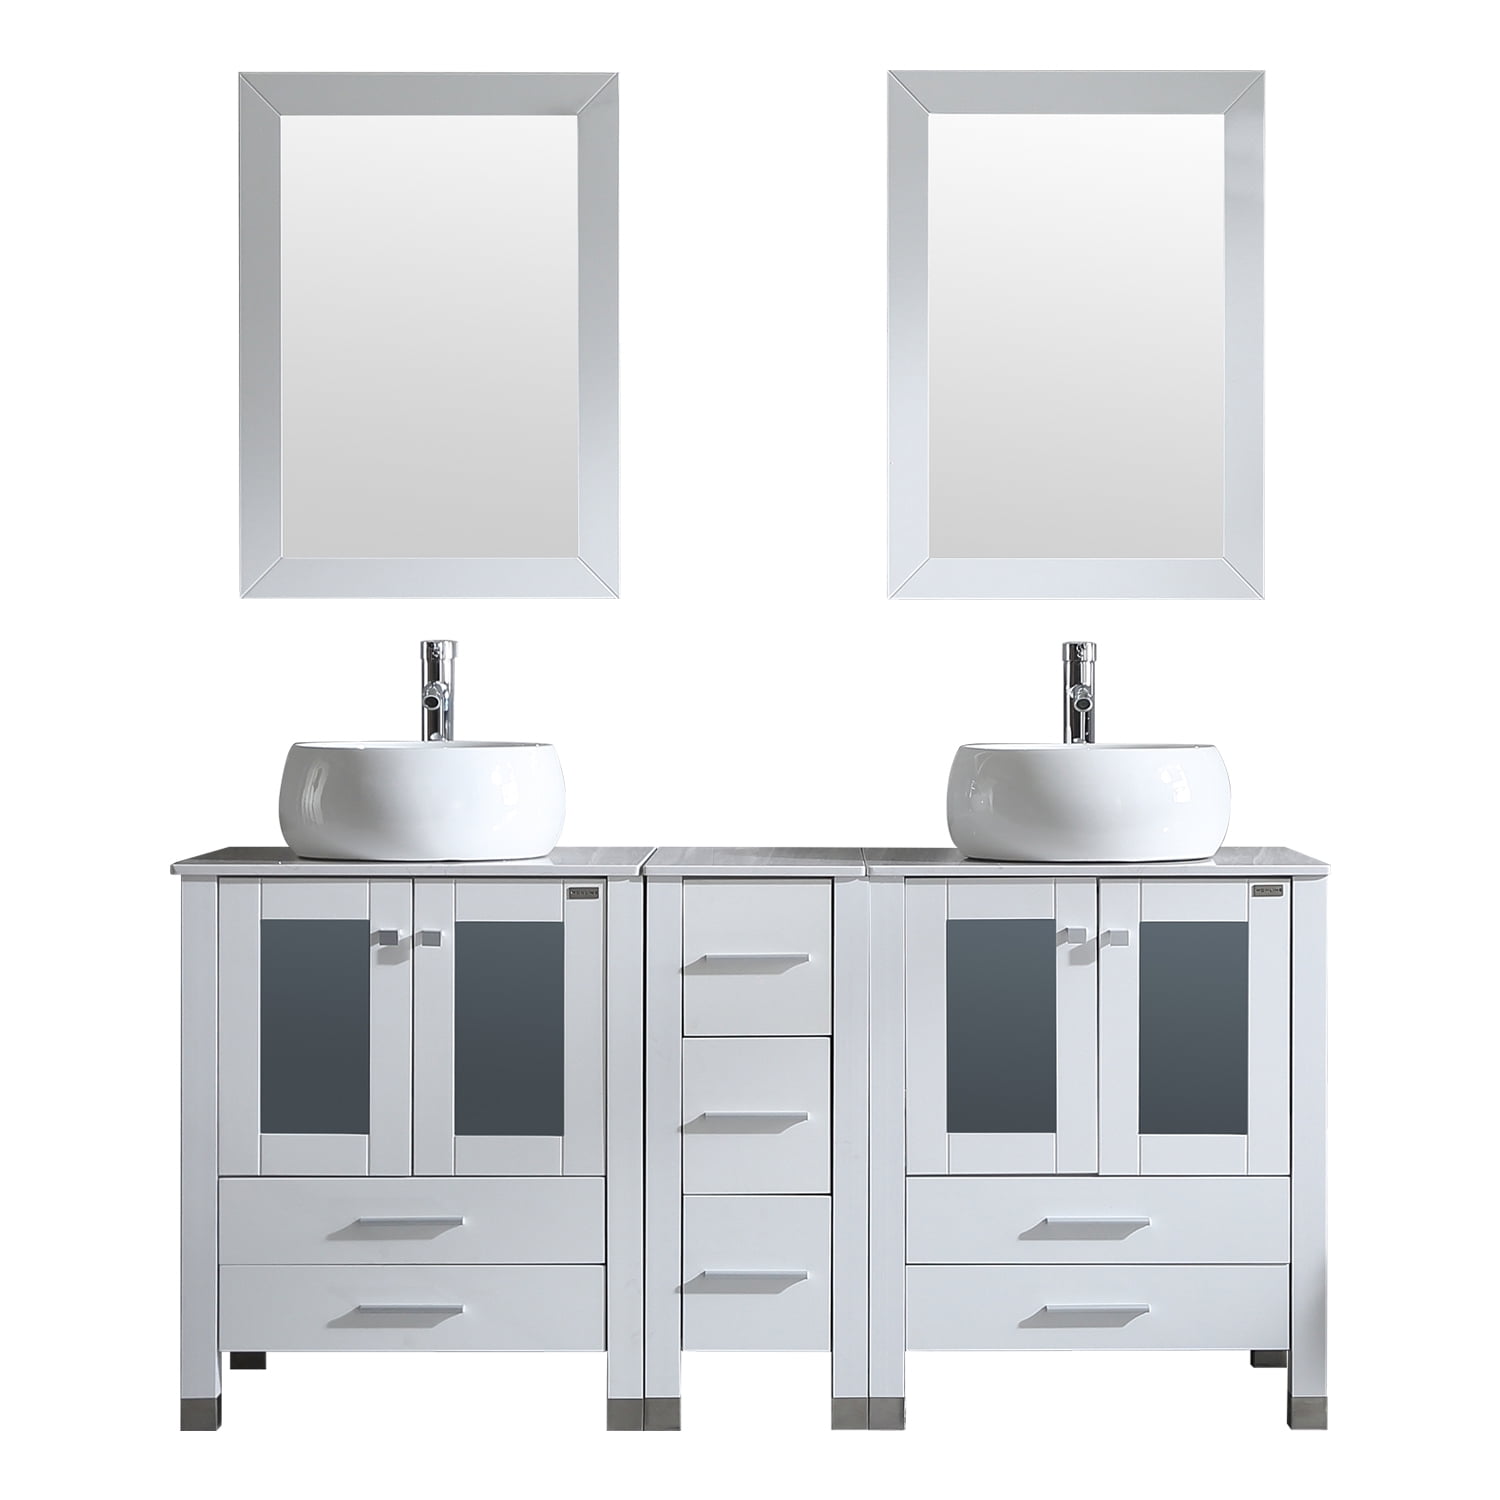 Wonline 60 White Bathroom Vanity Cabinet And Double Round Ceramic Vessel Sink Equipped With Chrome Faucet Drain And Mirror Vanities Set Walmart Com